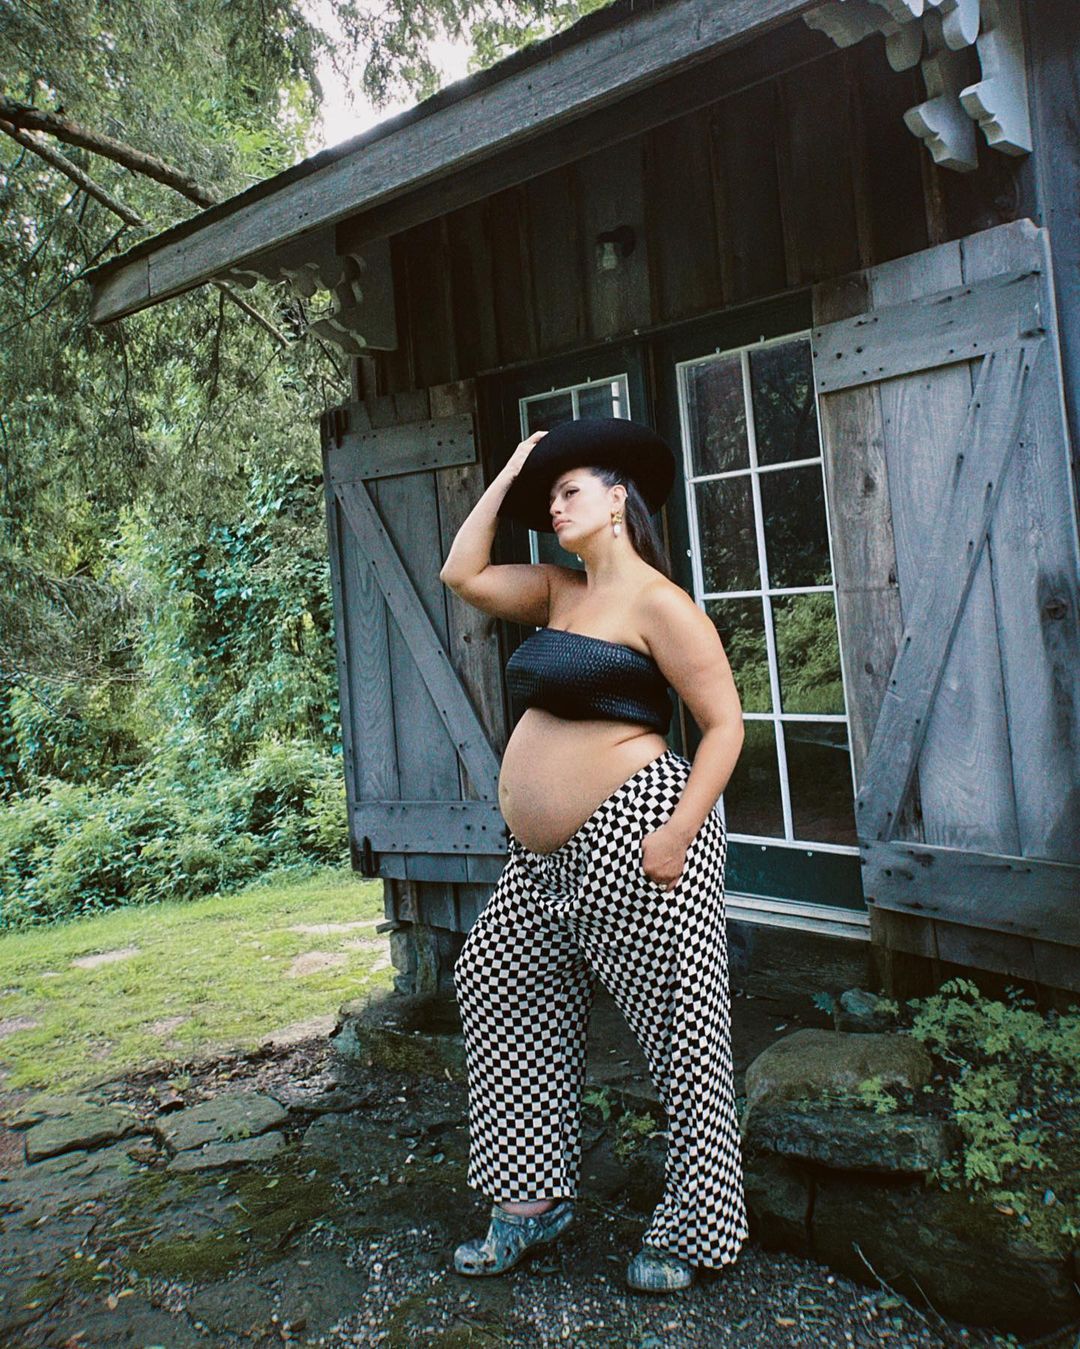 Ashley Graham Is Pregnant With Baby No. 2